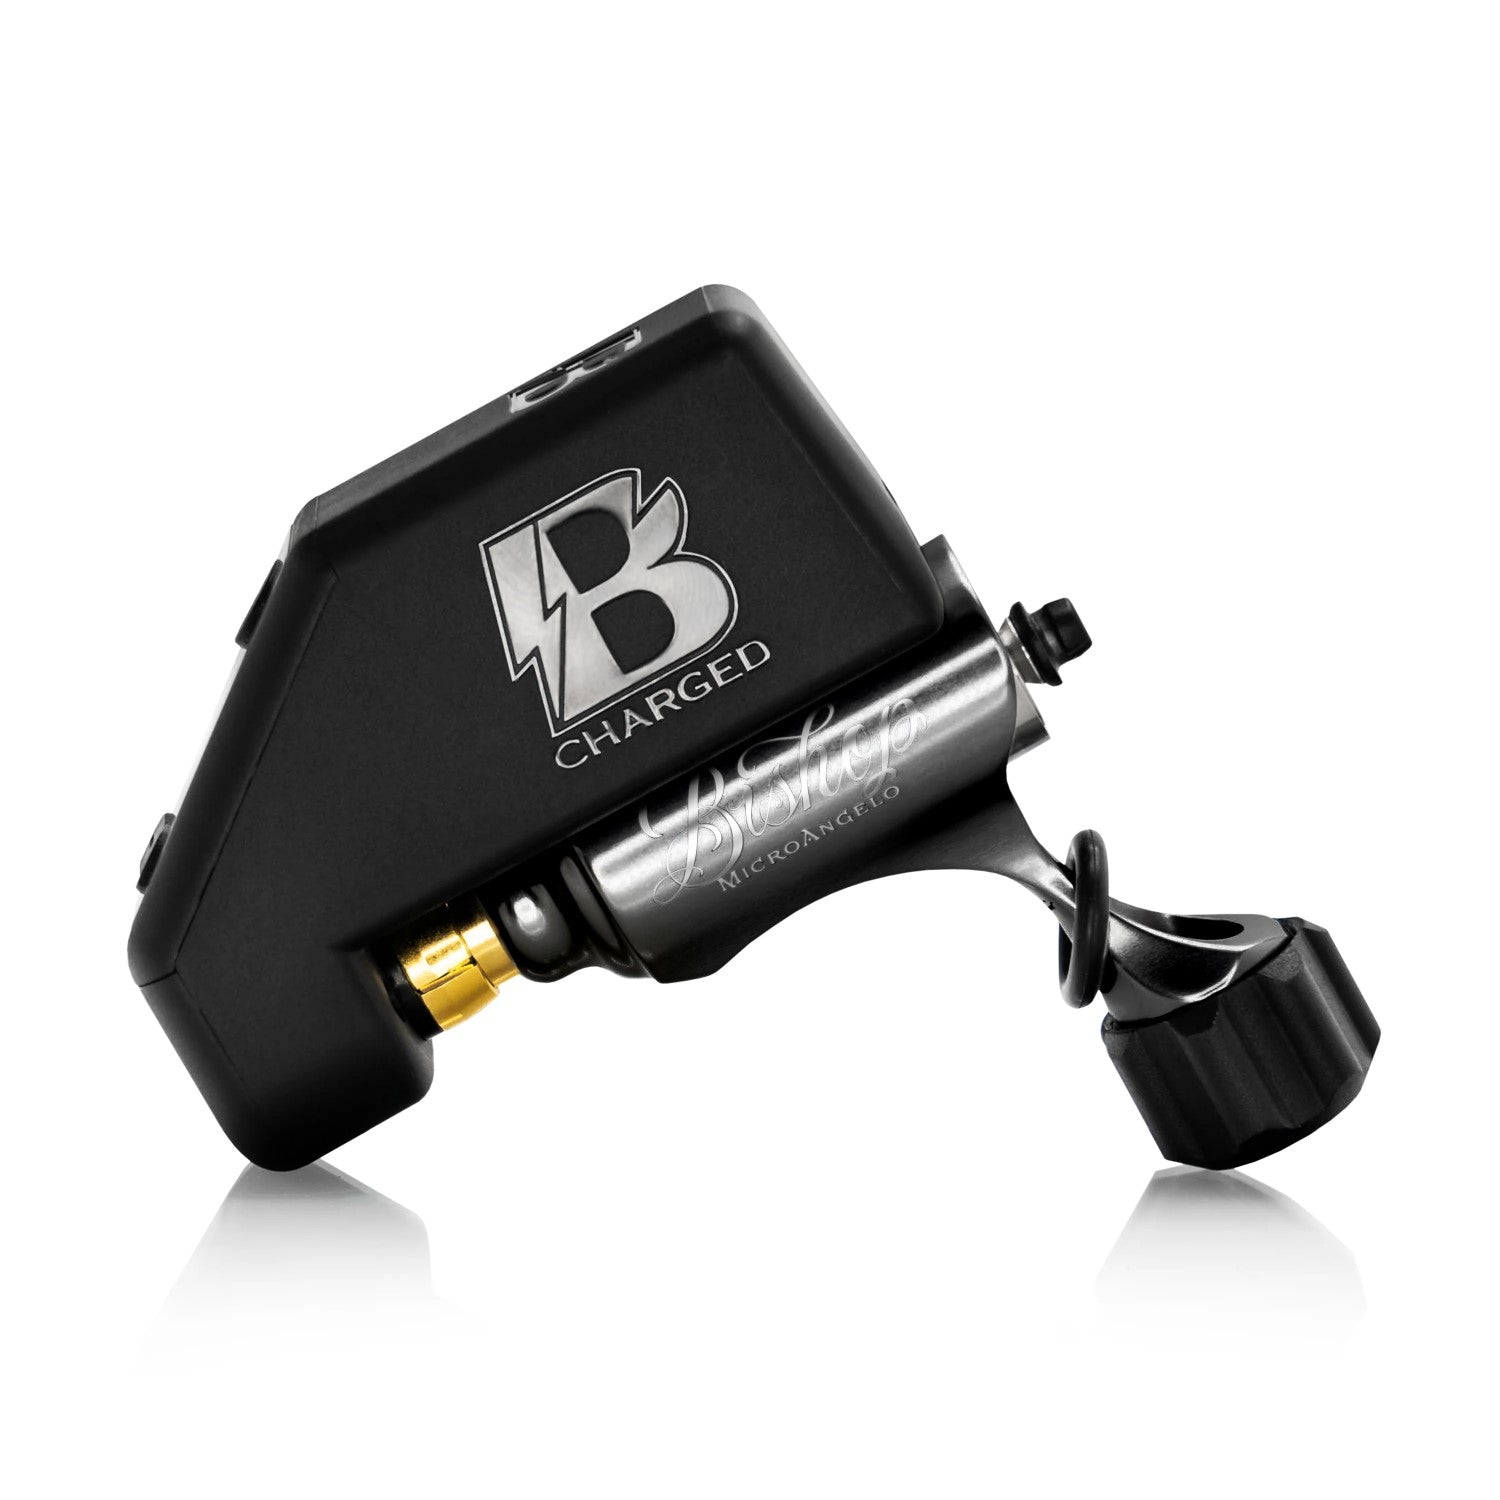 The Bishop Microangelo and Battery Pack Bundle